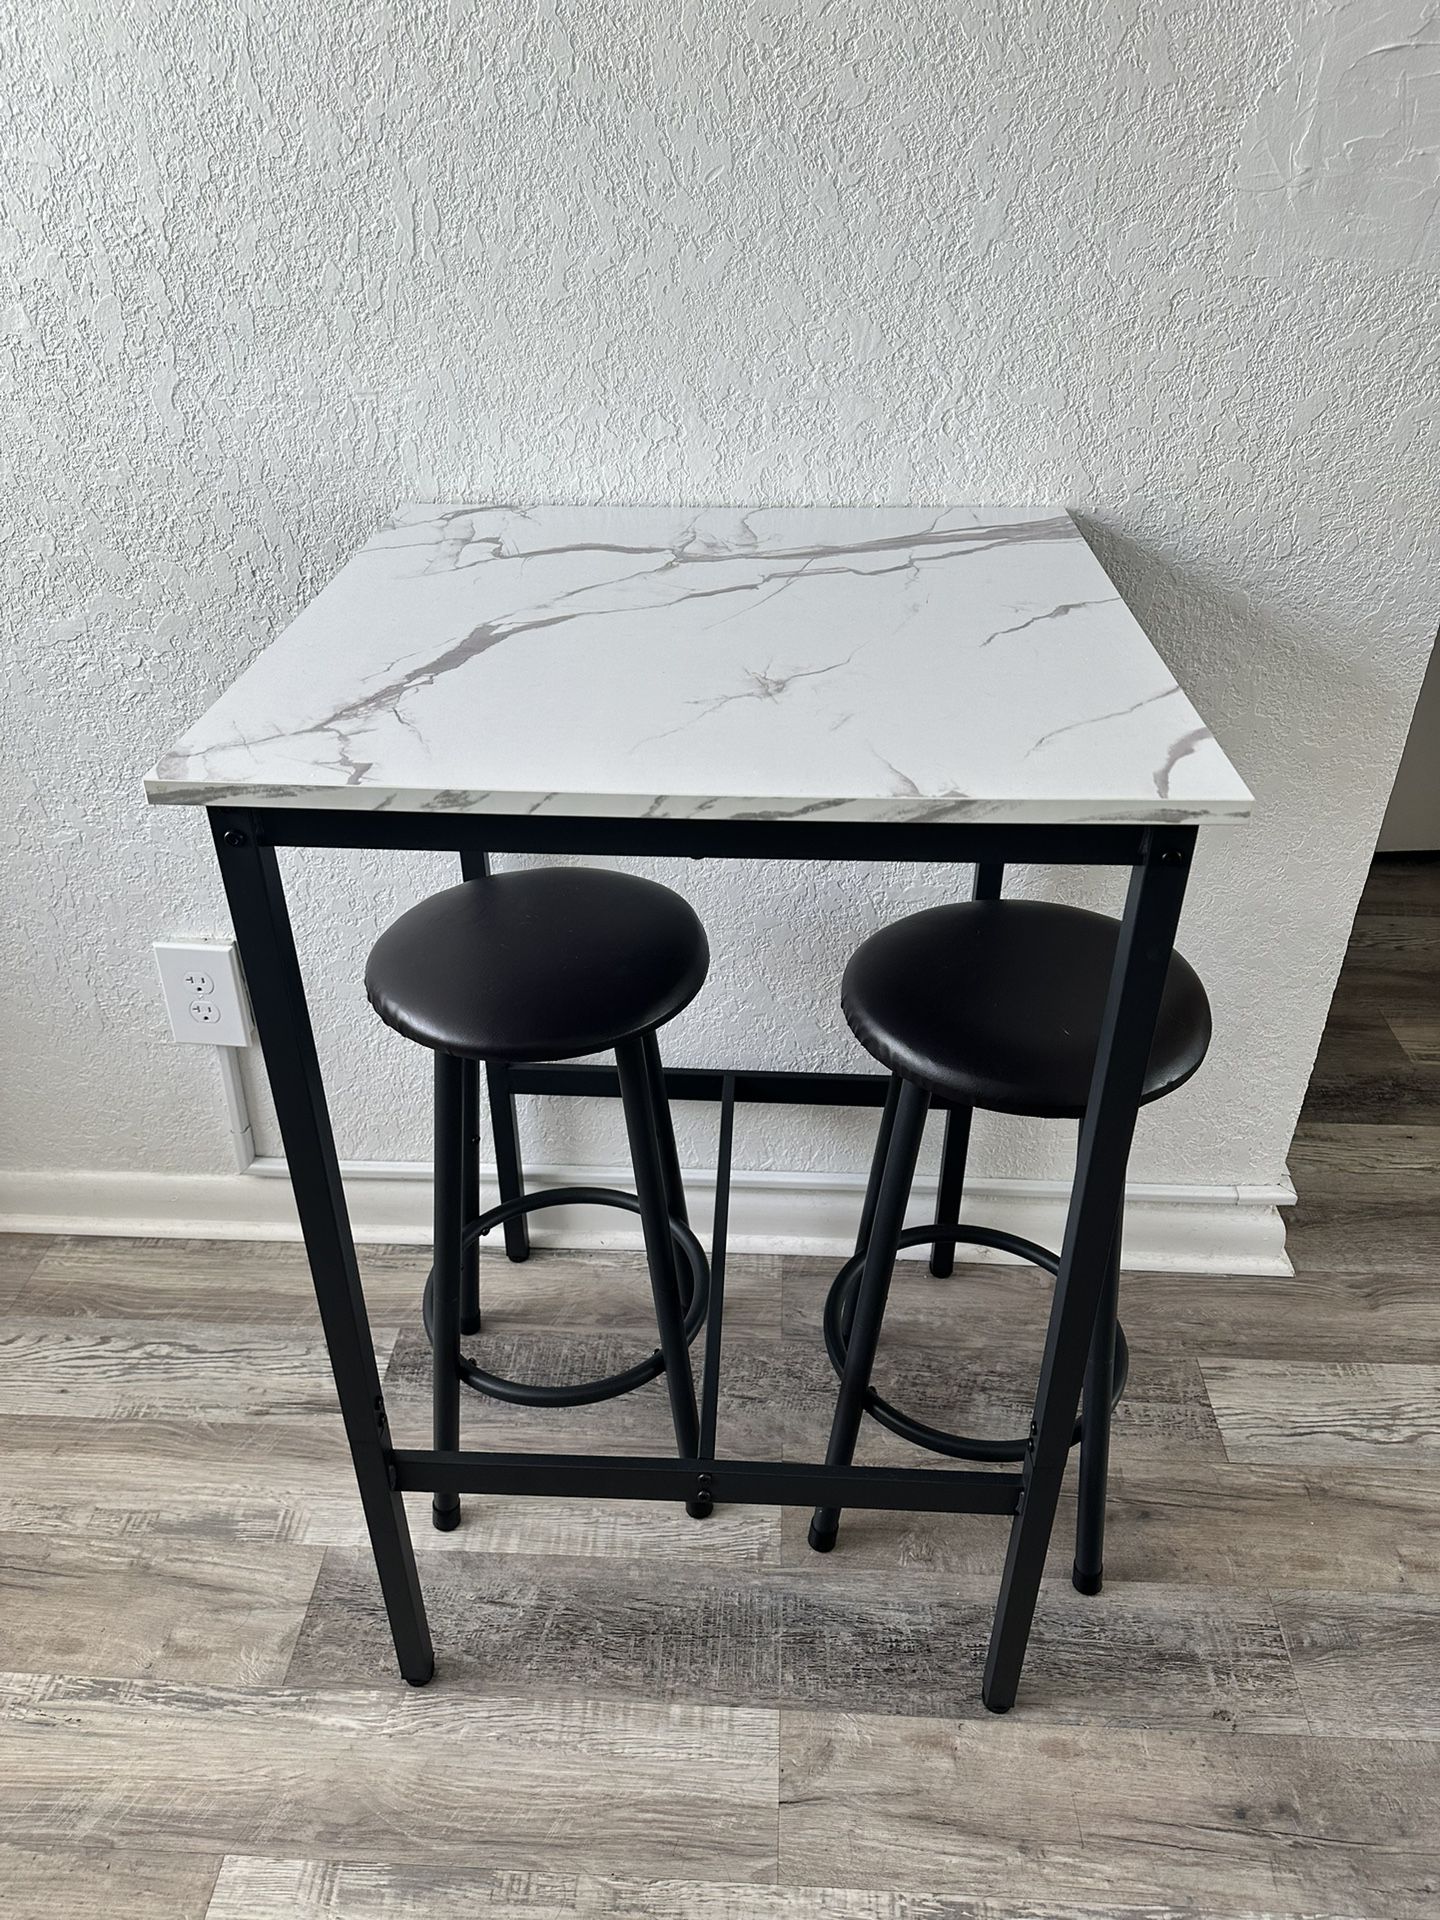 Small Kitchen High top Table & Chairs